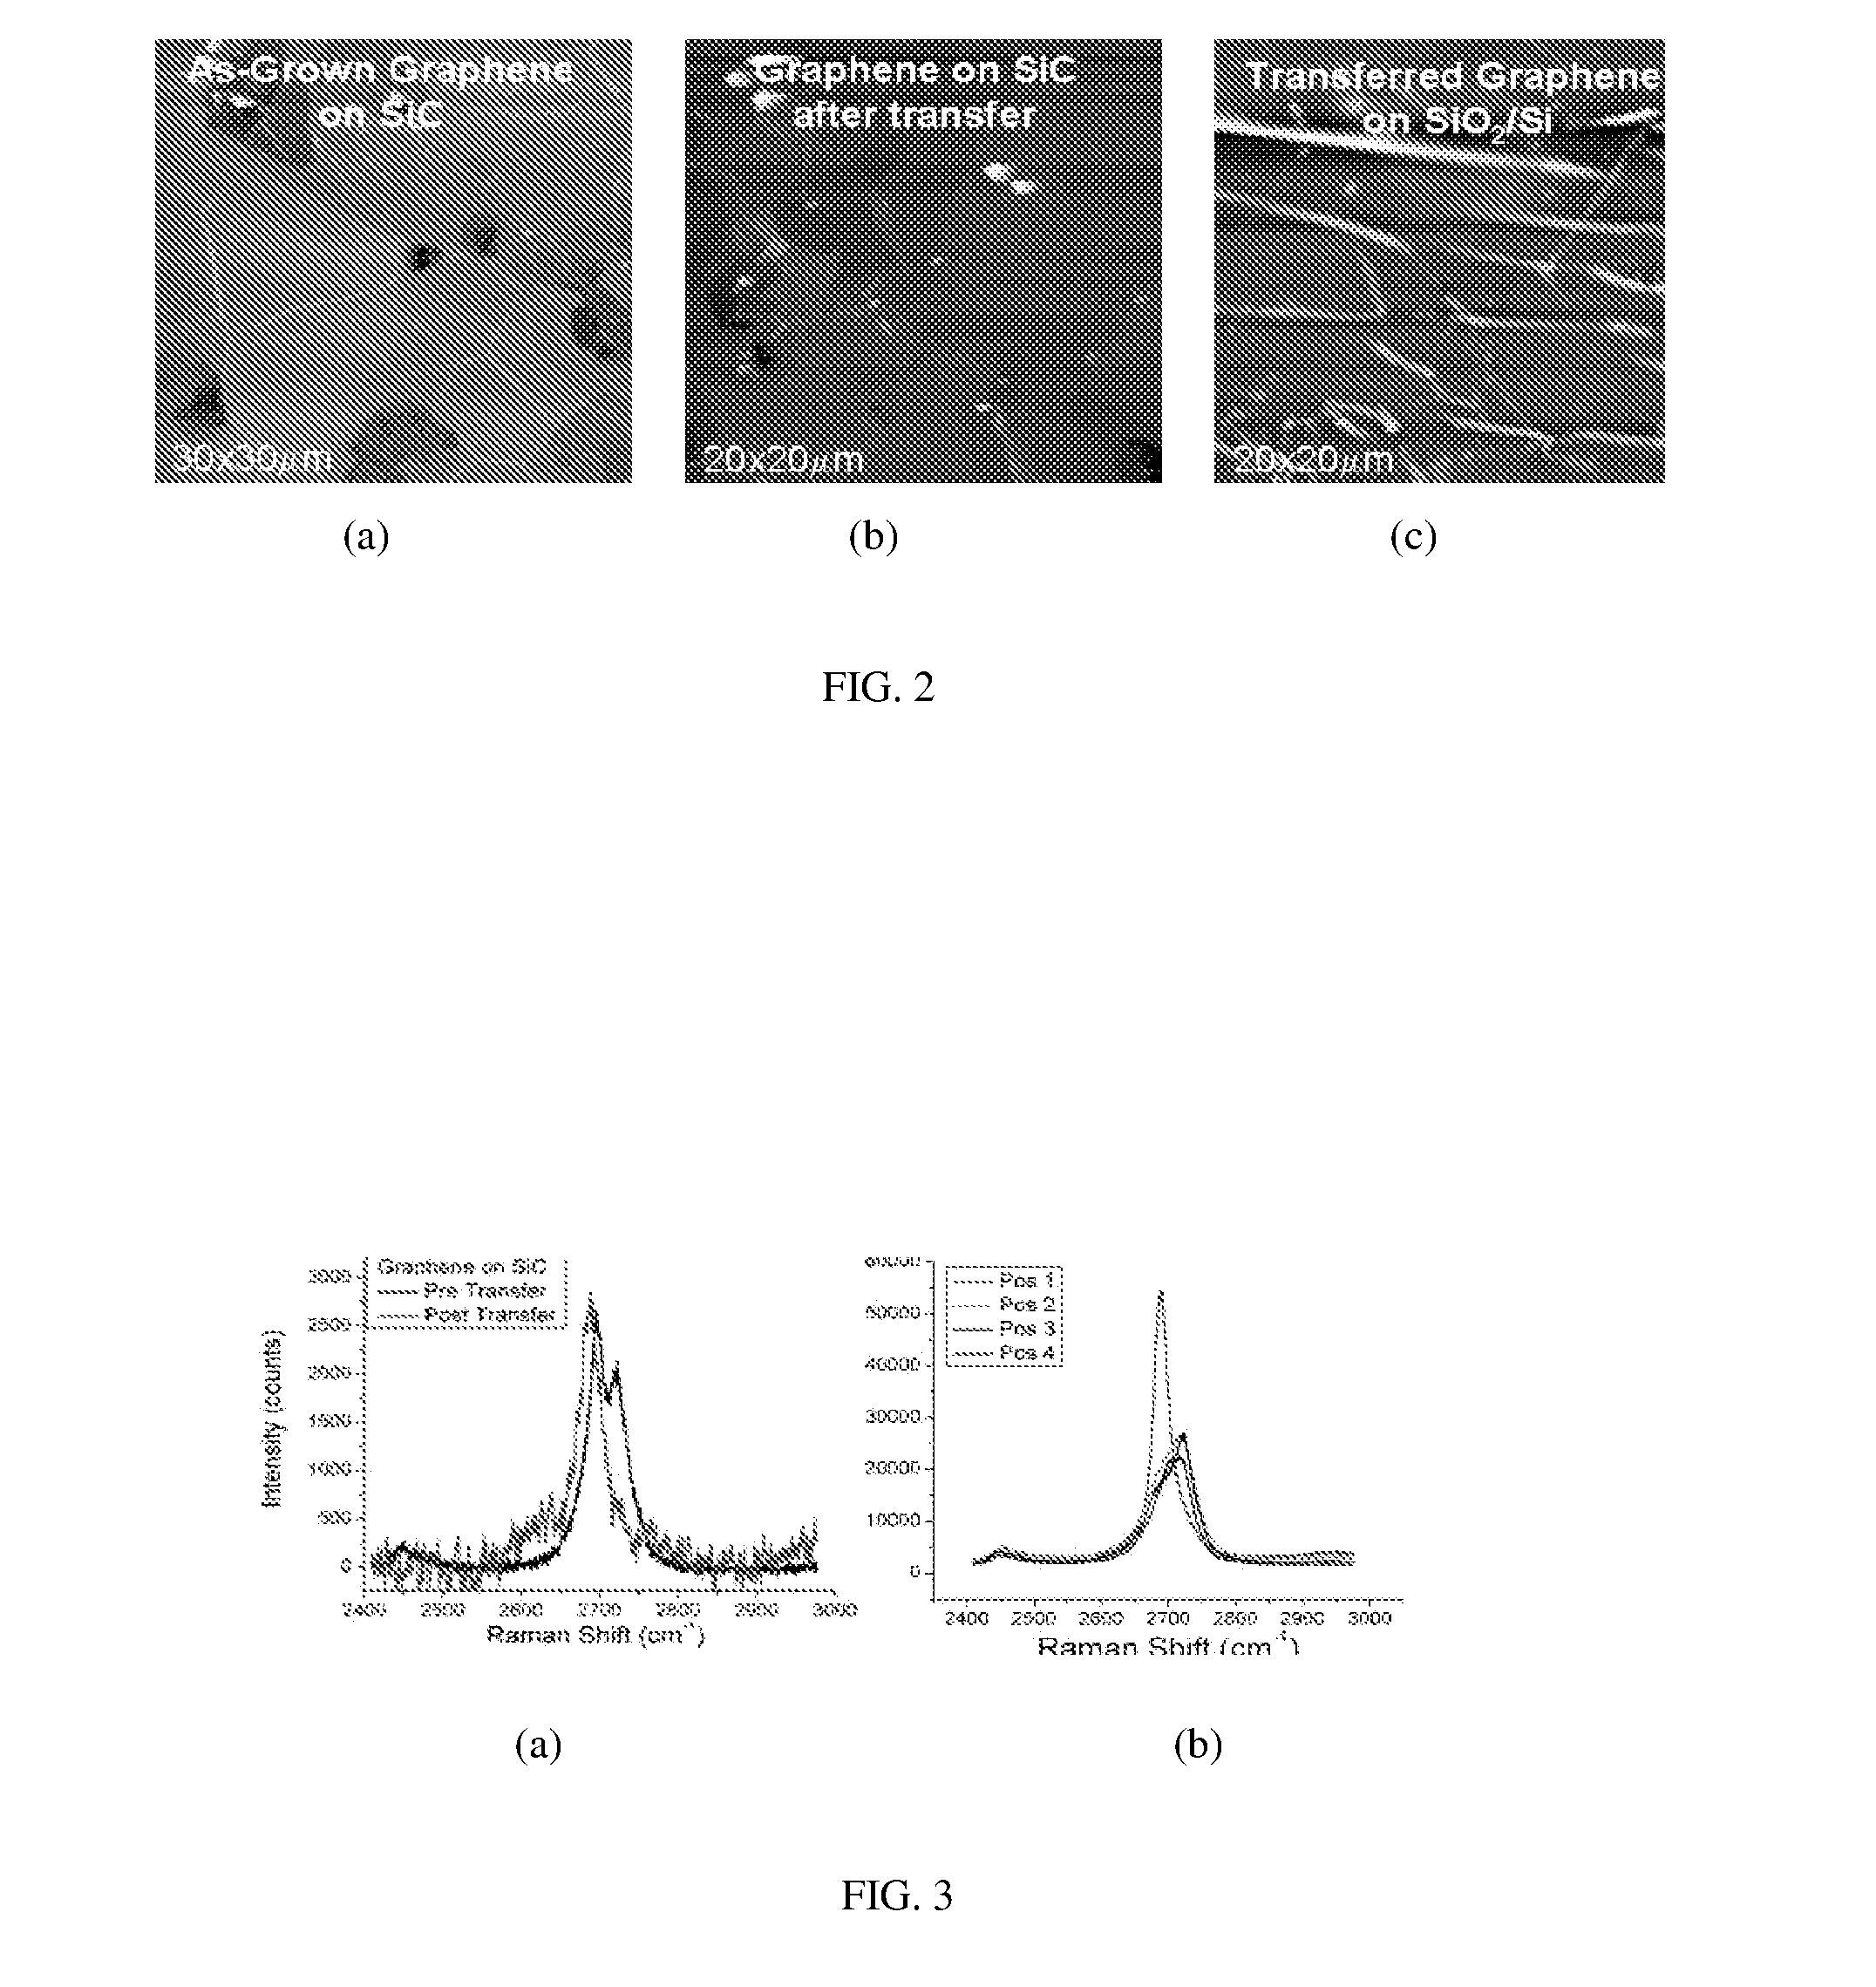 METHOD FOR THE REDUCTION OF GRAPHENE FILM THICKNESS AND THE REMOVAL AND TRANSFER OF EPITAXIAL GRAPHENE FILMS FROM SiC SUBSTRATES